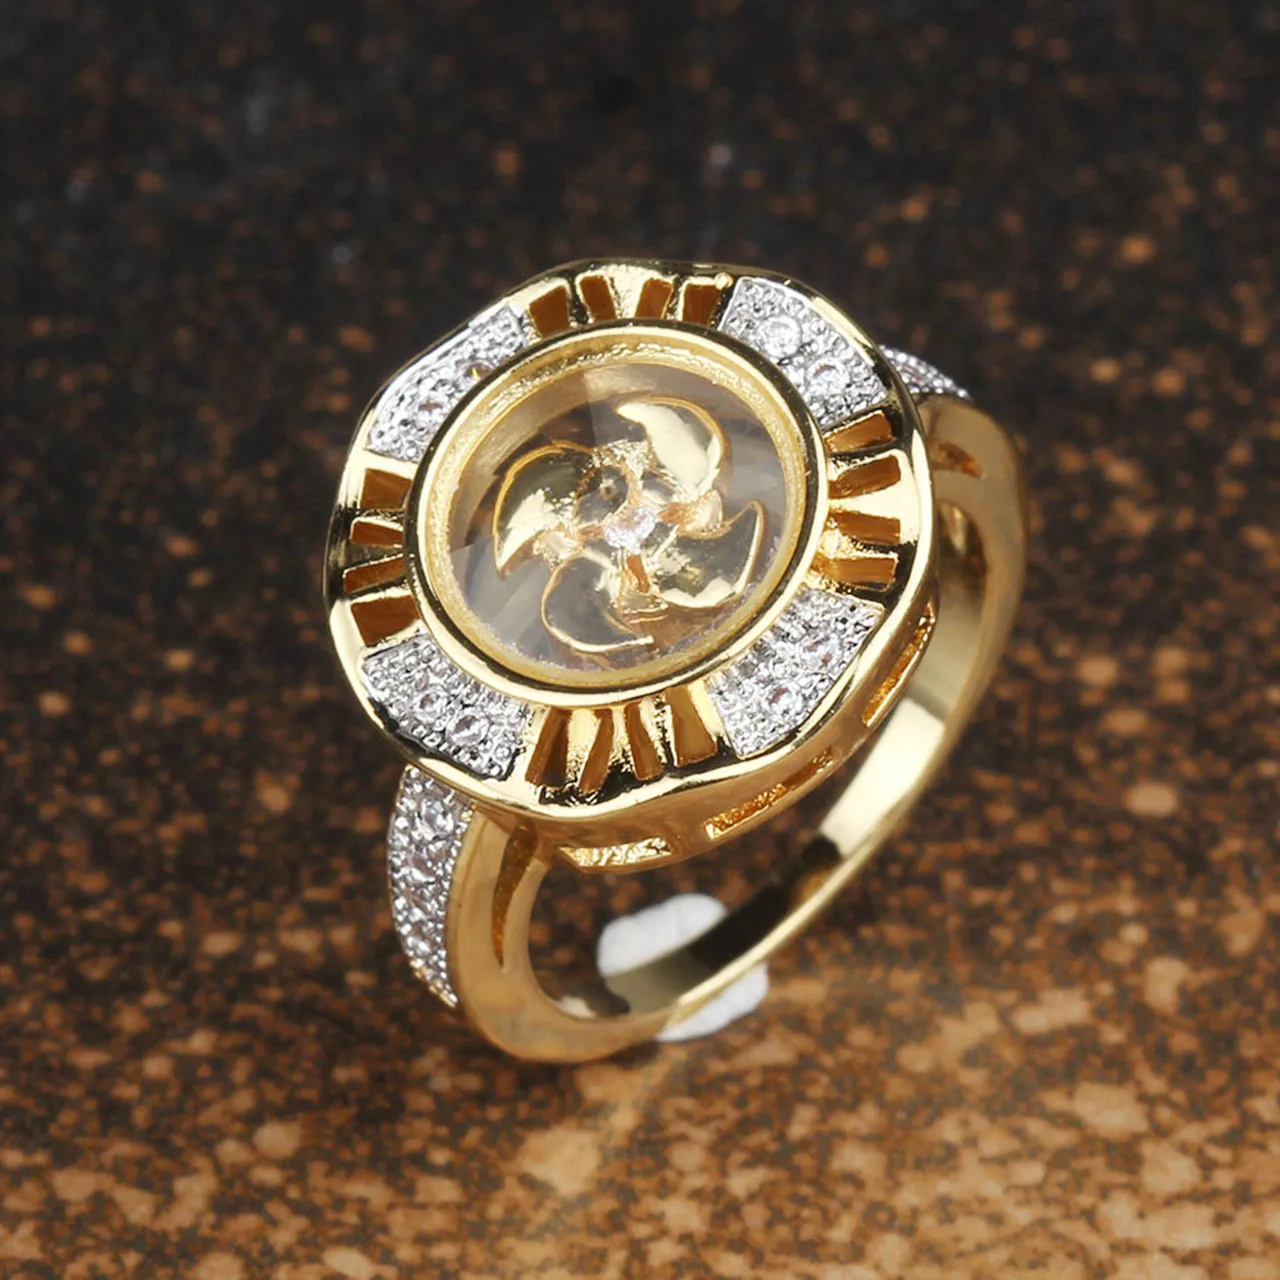 

Vintage Unisex Gold Ring Lucky Turn Windmill Rotating Ring Banquet Jewelry Accessories Gift